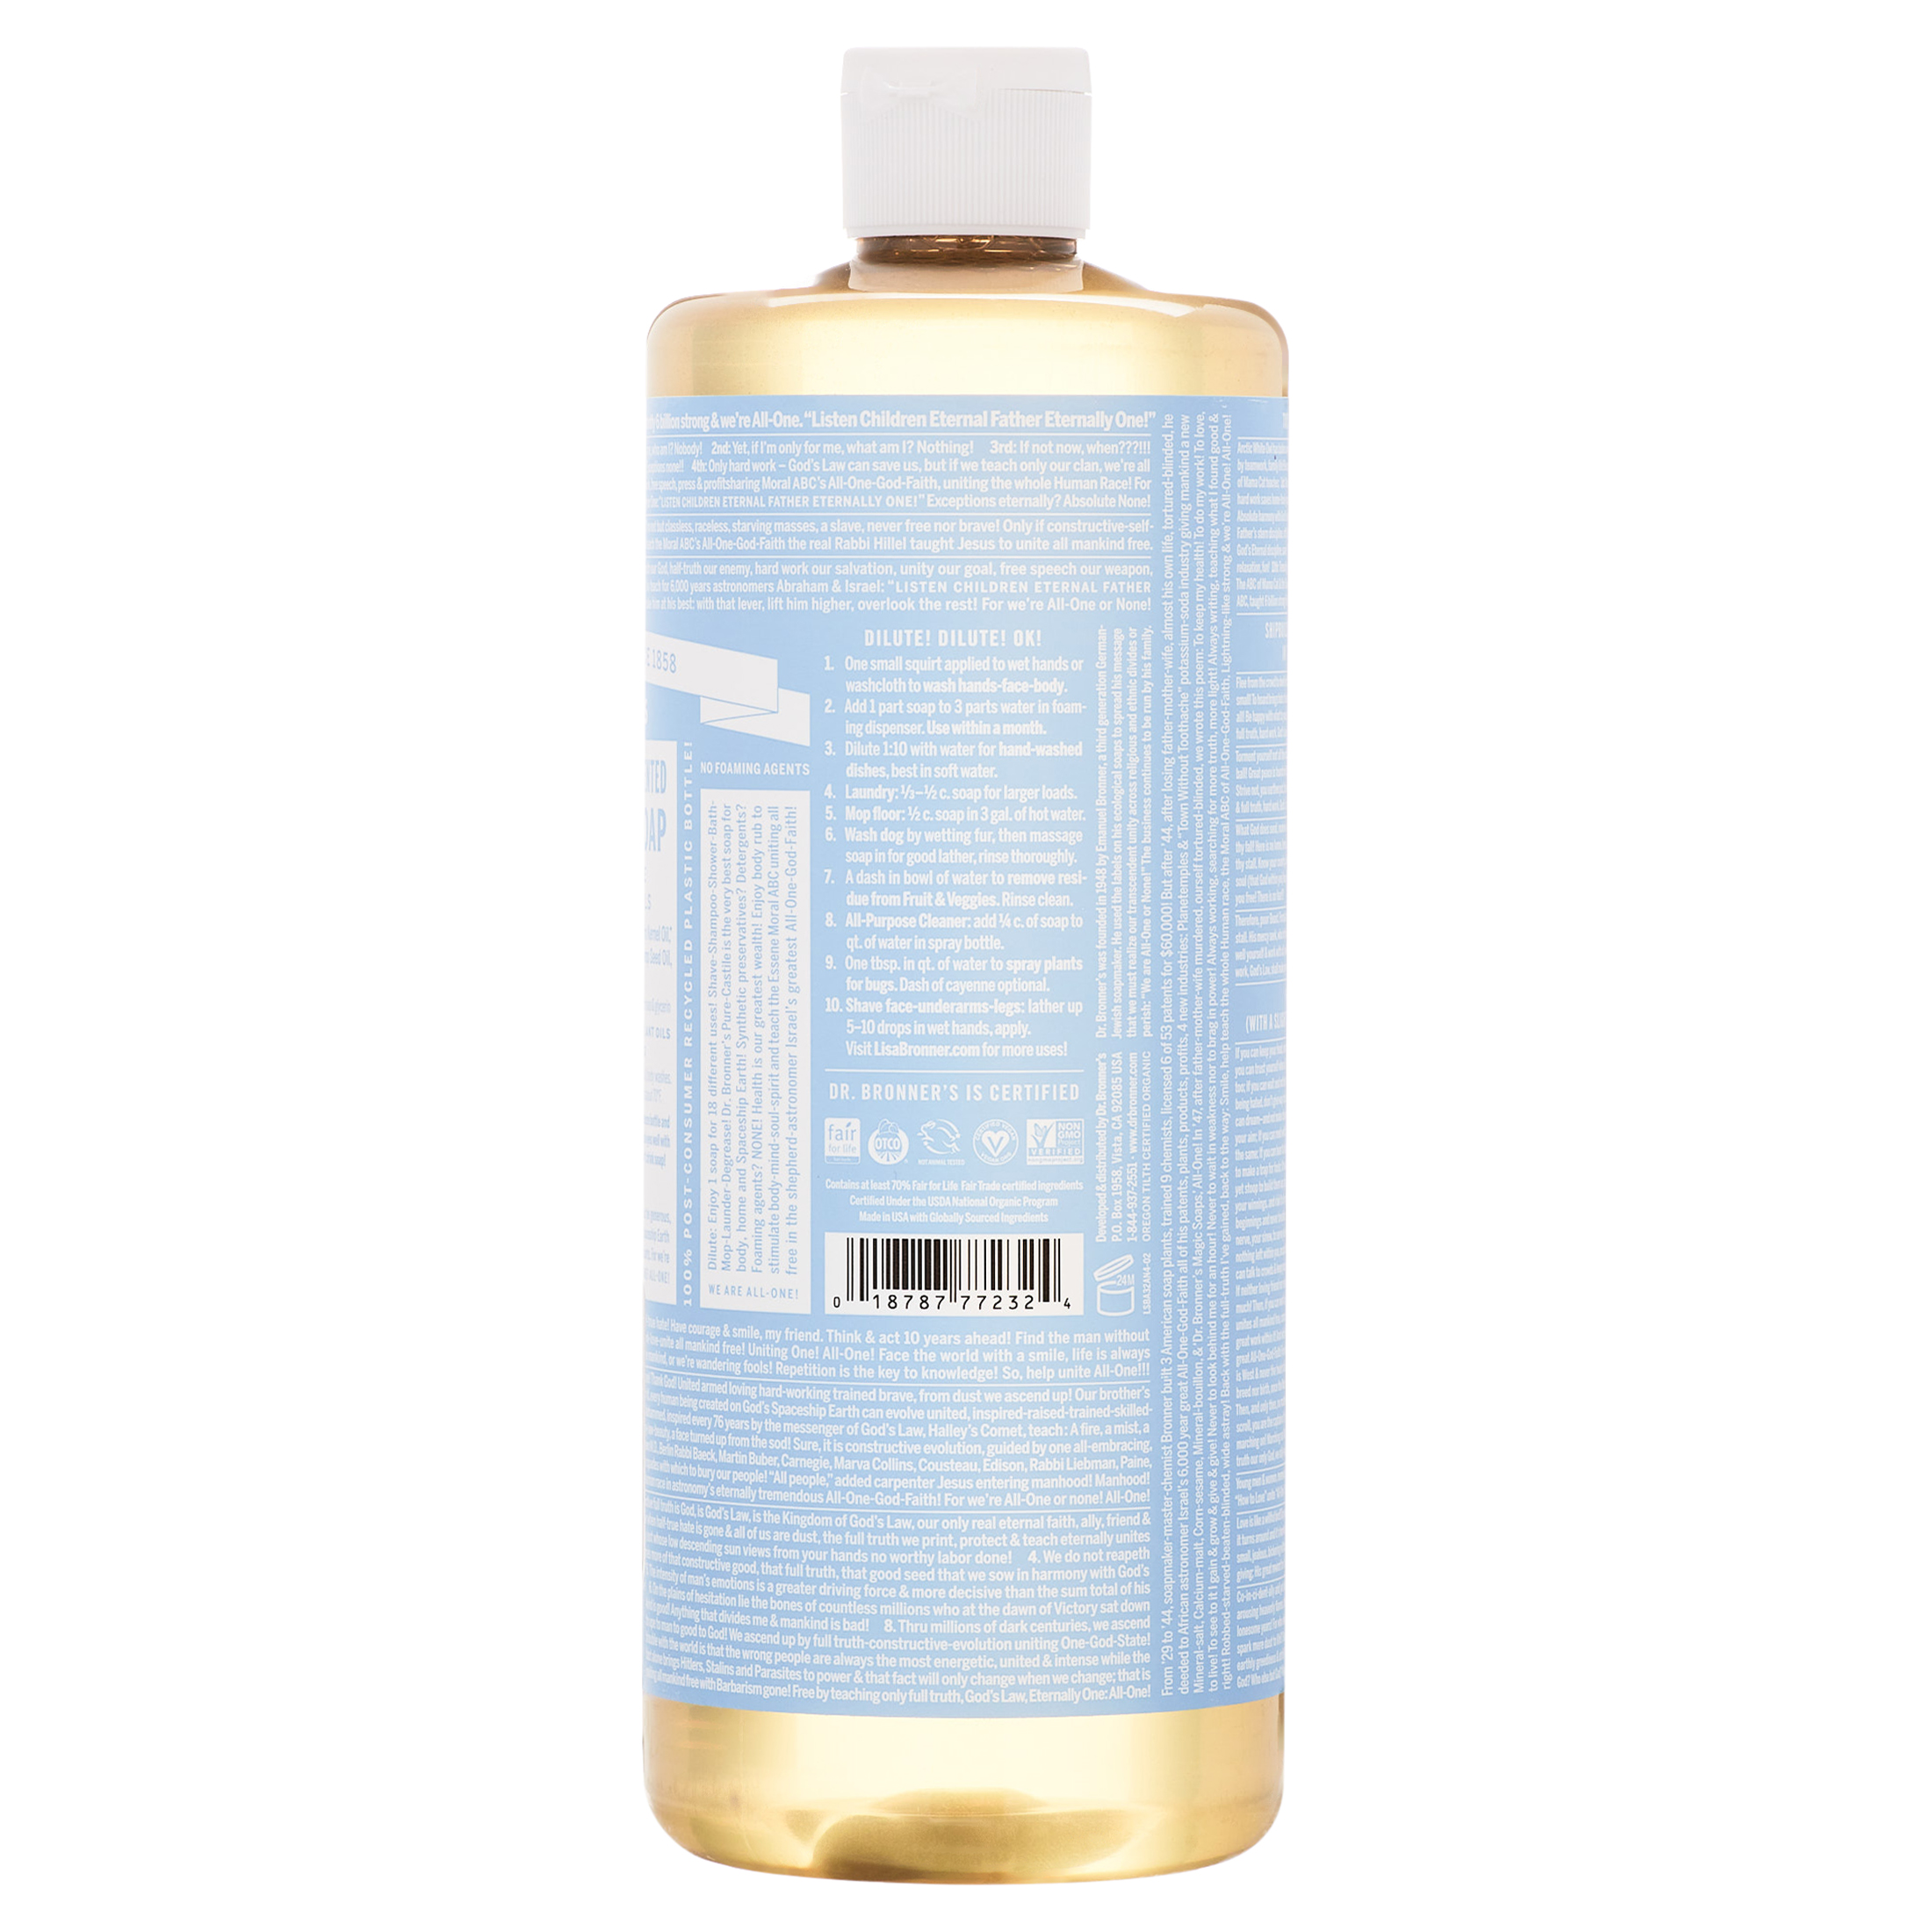 Dr. Bronner's Pure-Castile Liquid Soap – Baby – 32 oz - image 4 of 5